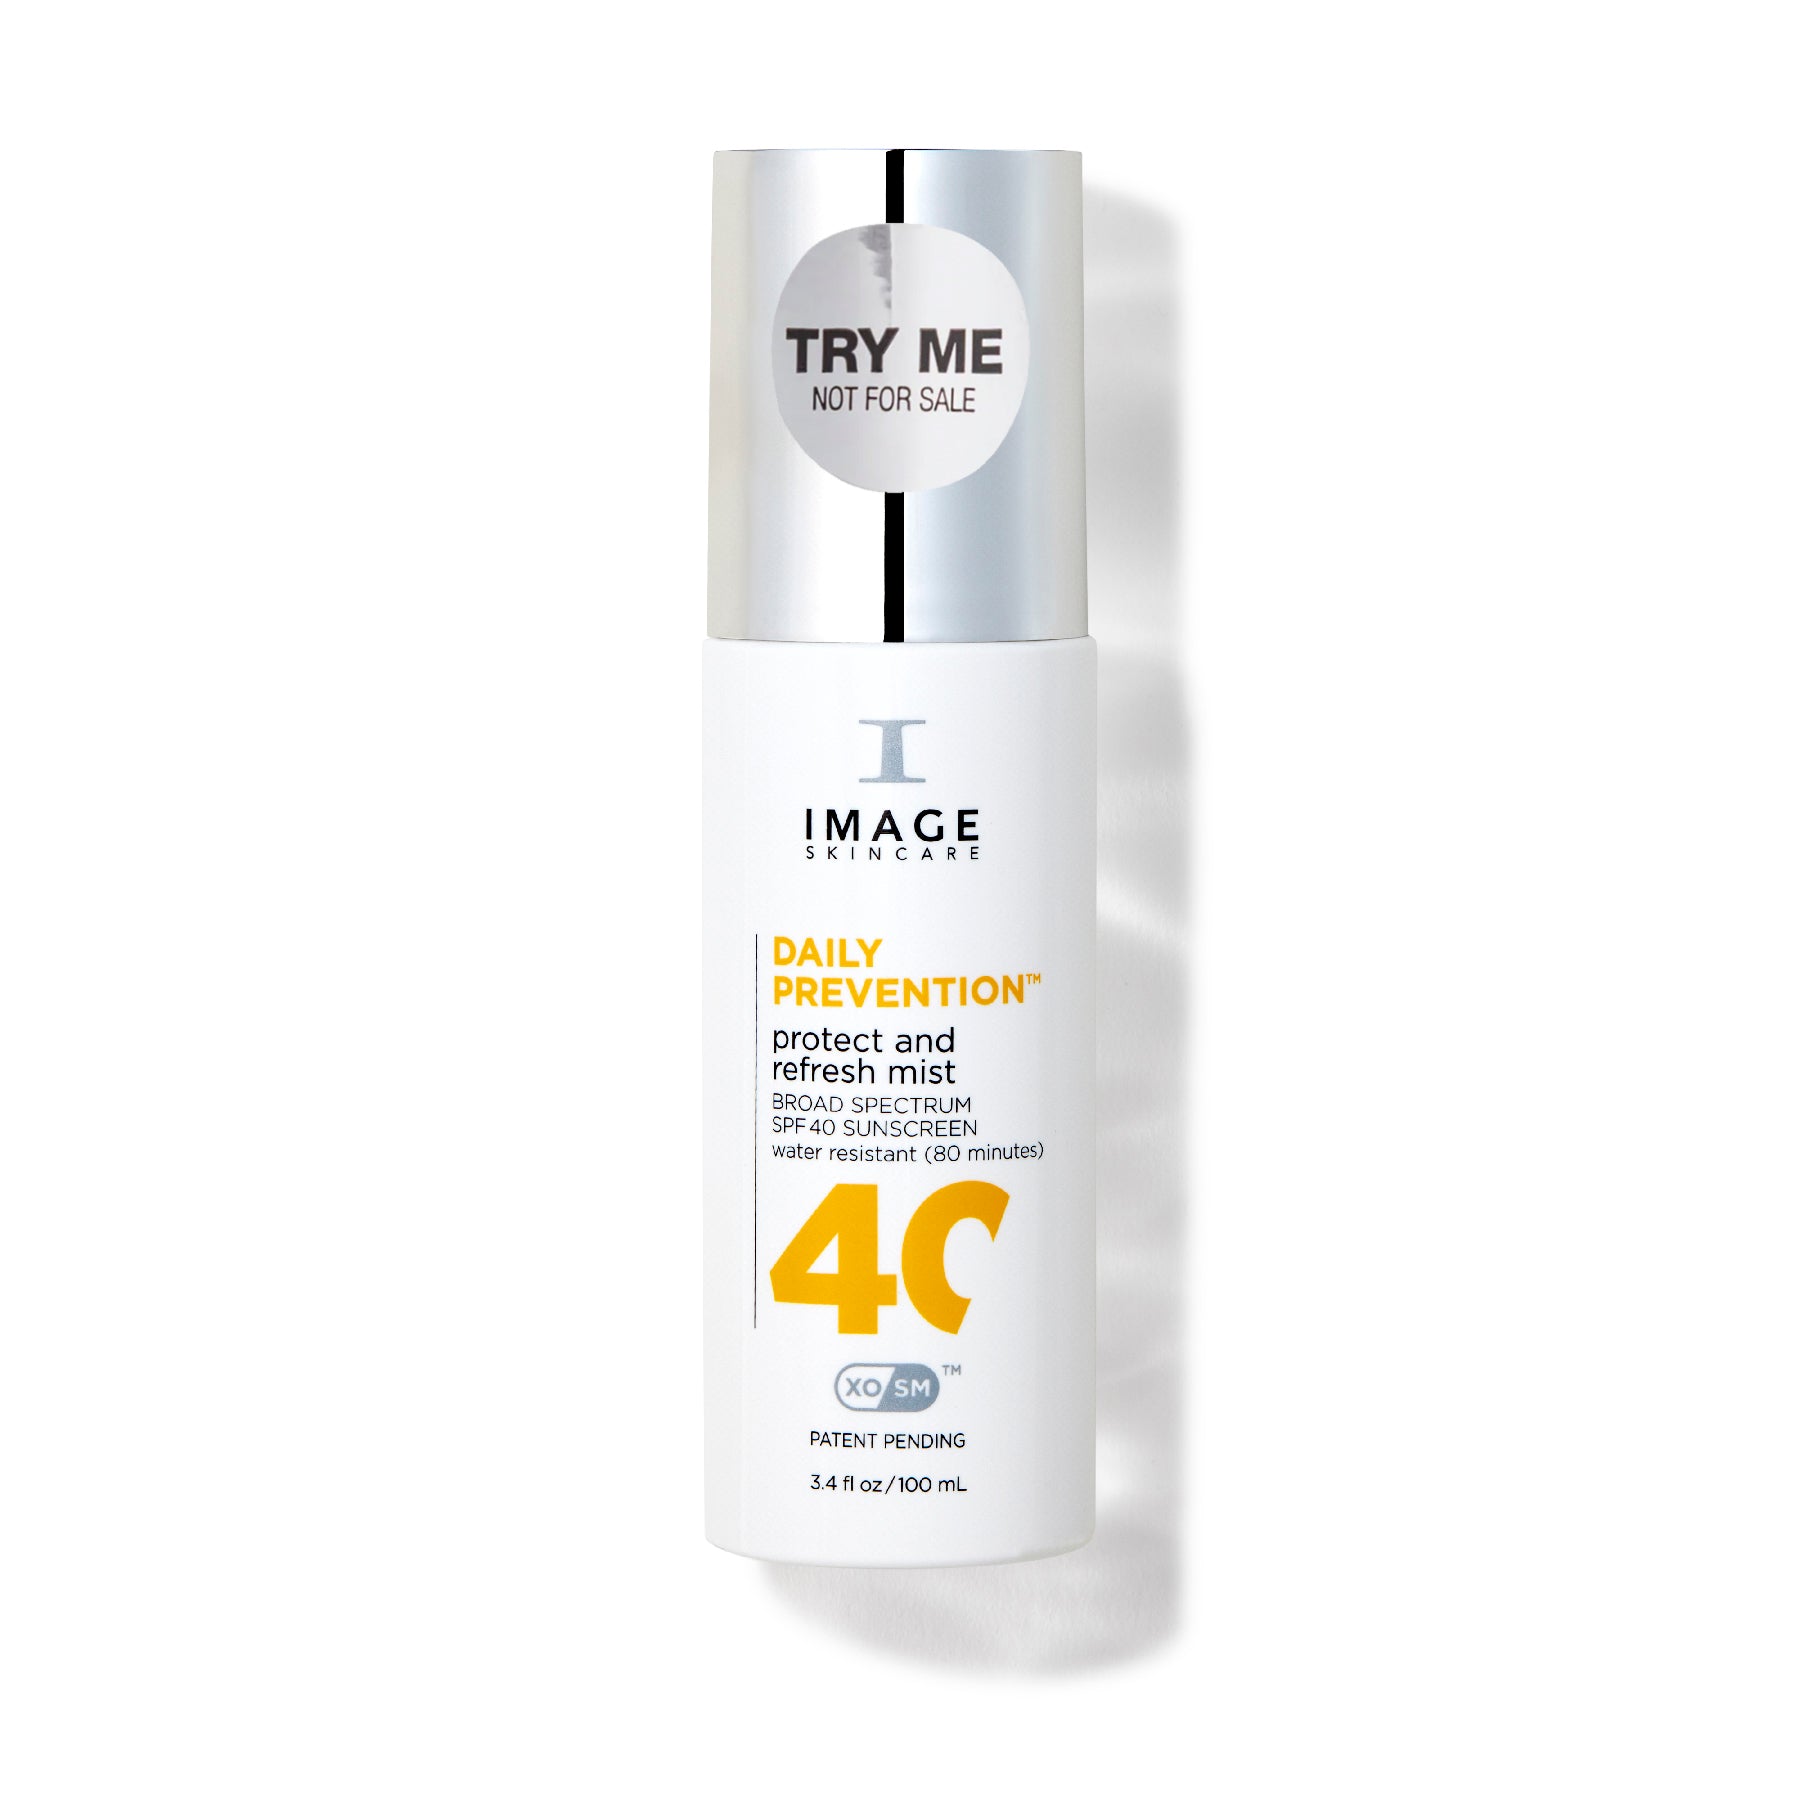 DAILY PREVENTION™ tester protect and refresh mist SPF 40